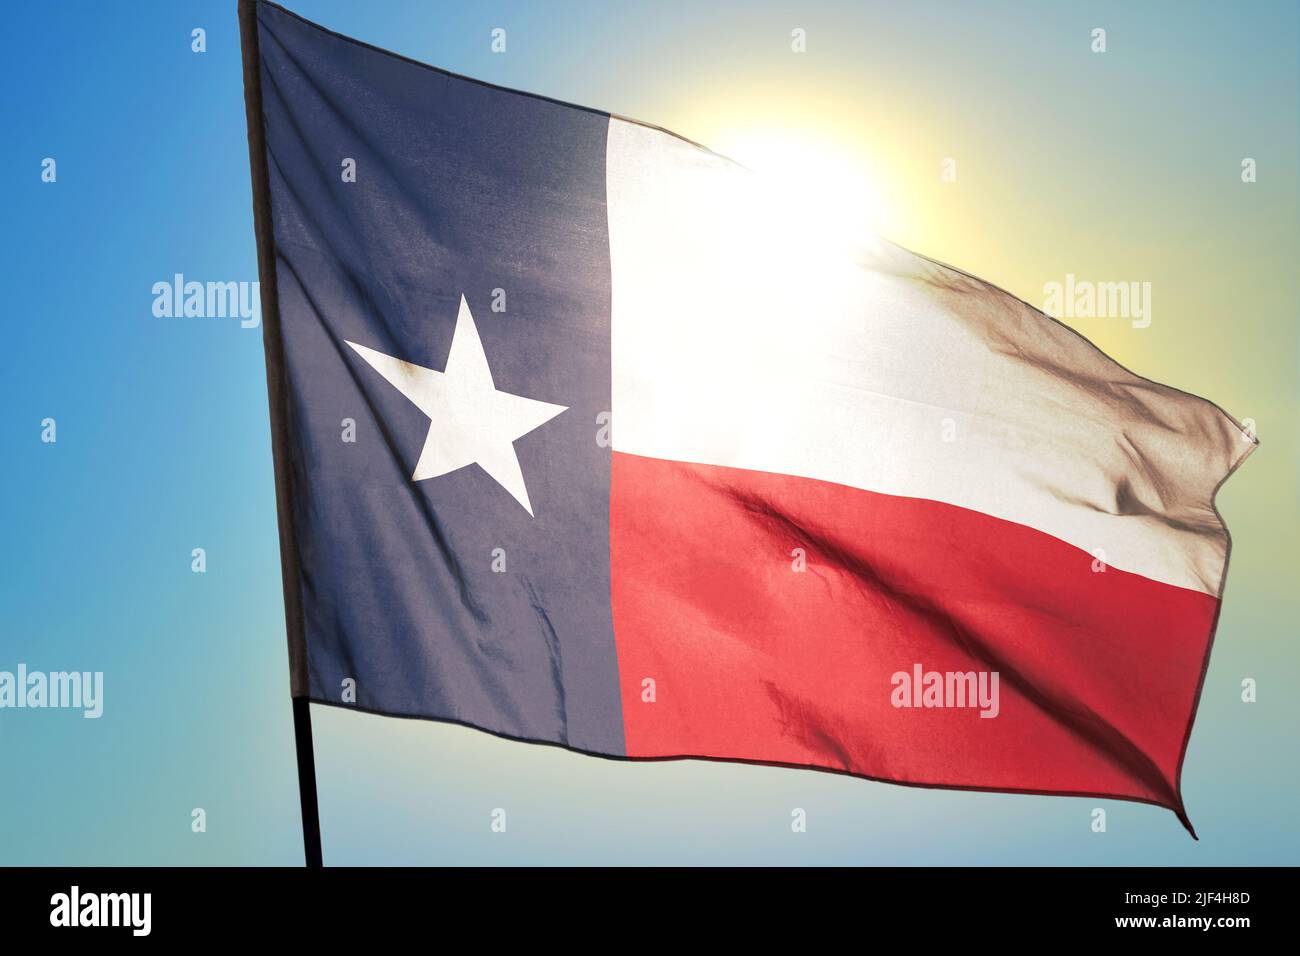 Texas state of United States flag waving on the wind Stock Photo